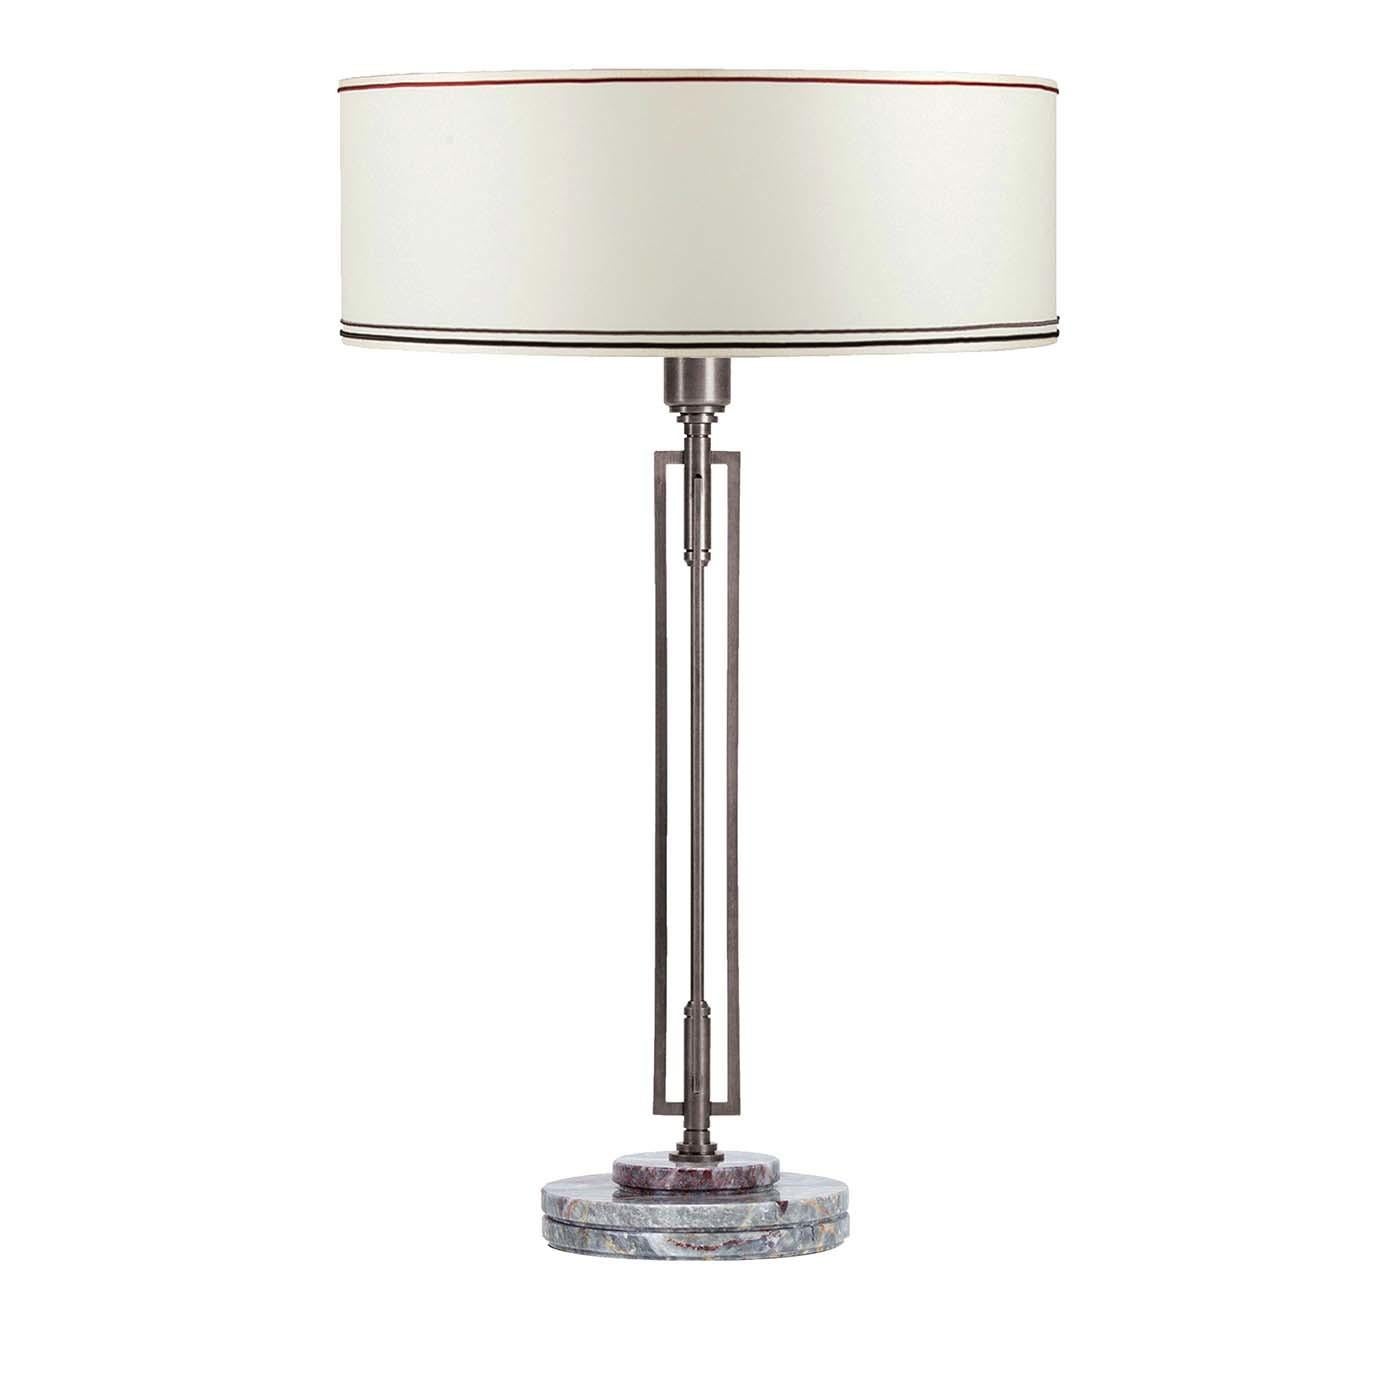 Blending chic flair with a touch of traditional appeal, this design will enliven any interior decor. Composed of a circular base made of SalomÃ marble, the steel structure is formed by a slender rod accented with an open rectangular decoration. The